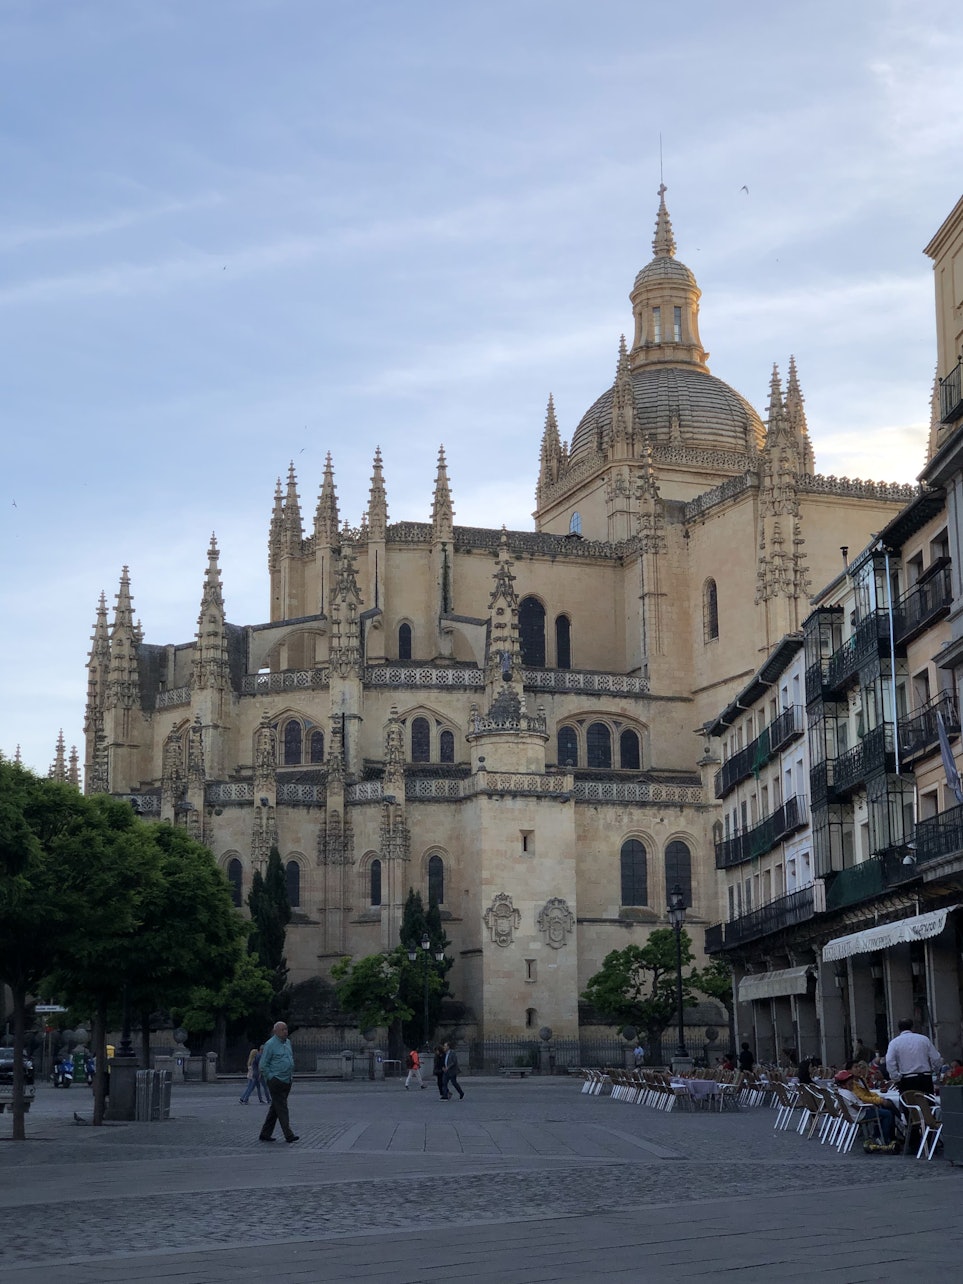 Segovia Guided Tour: City, Cathedral & Alcázar - Accommodations in Segovia